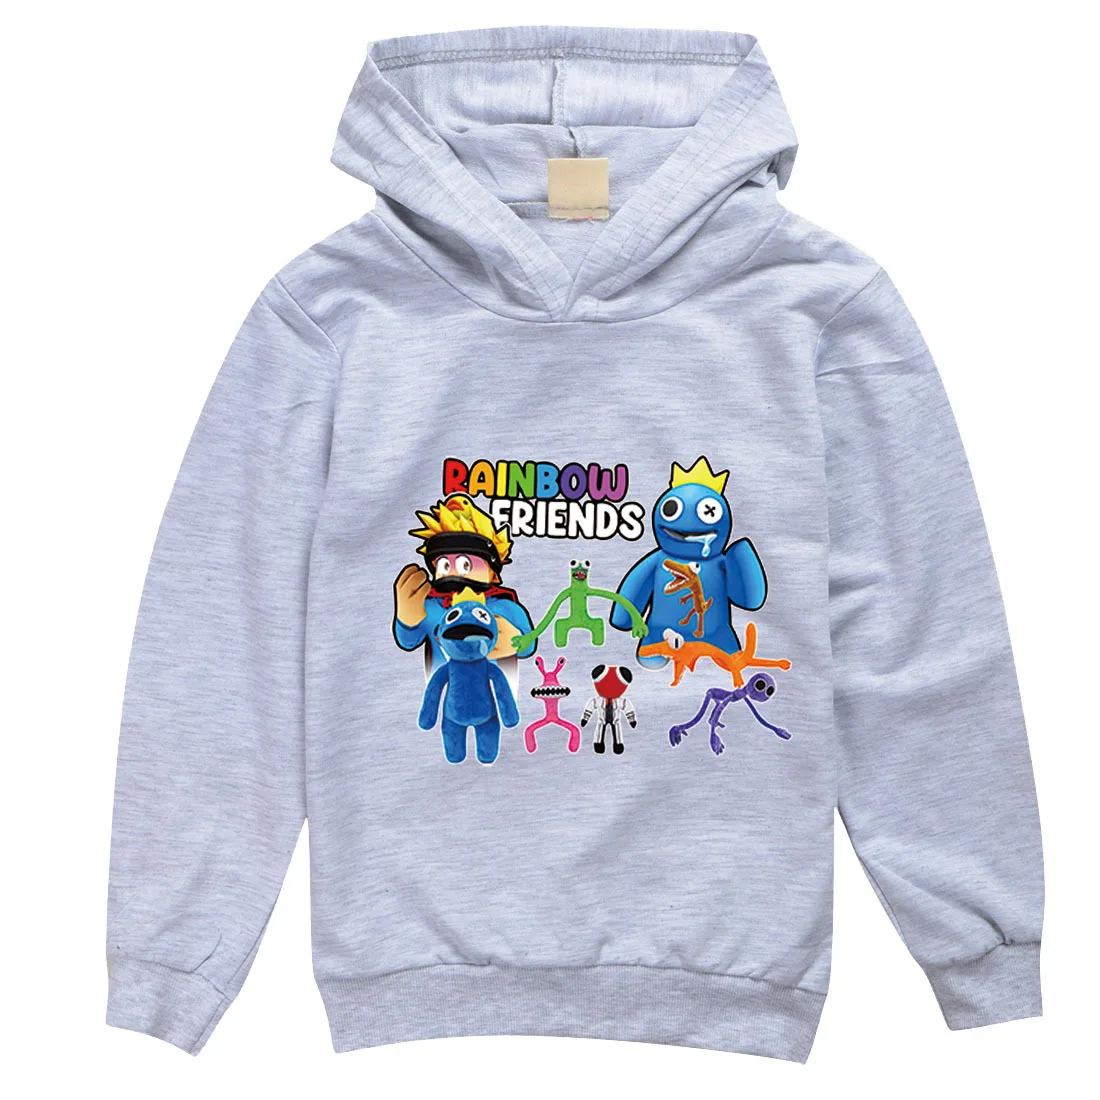 

New Game Hot rainbow friends Kids Clothes Boys Casual Tops Baby Girls Cotton Sweatshirt Children Casual Teenager Hoodie